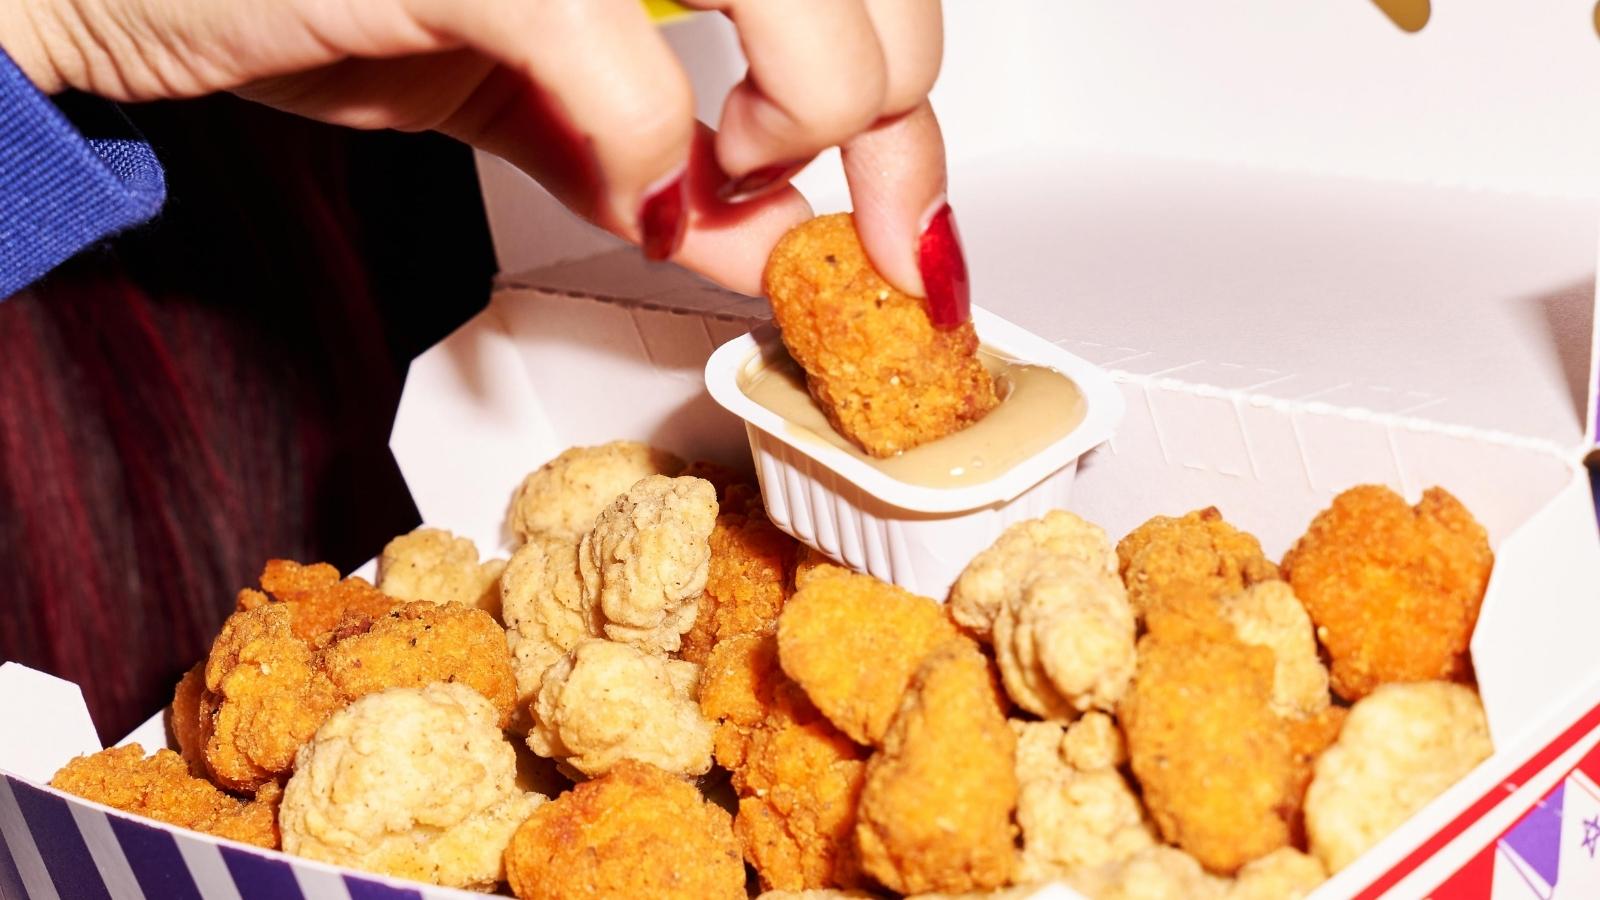  Best Chicken Franchises to Own